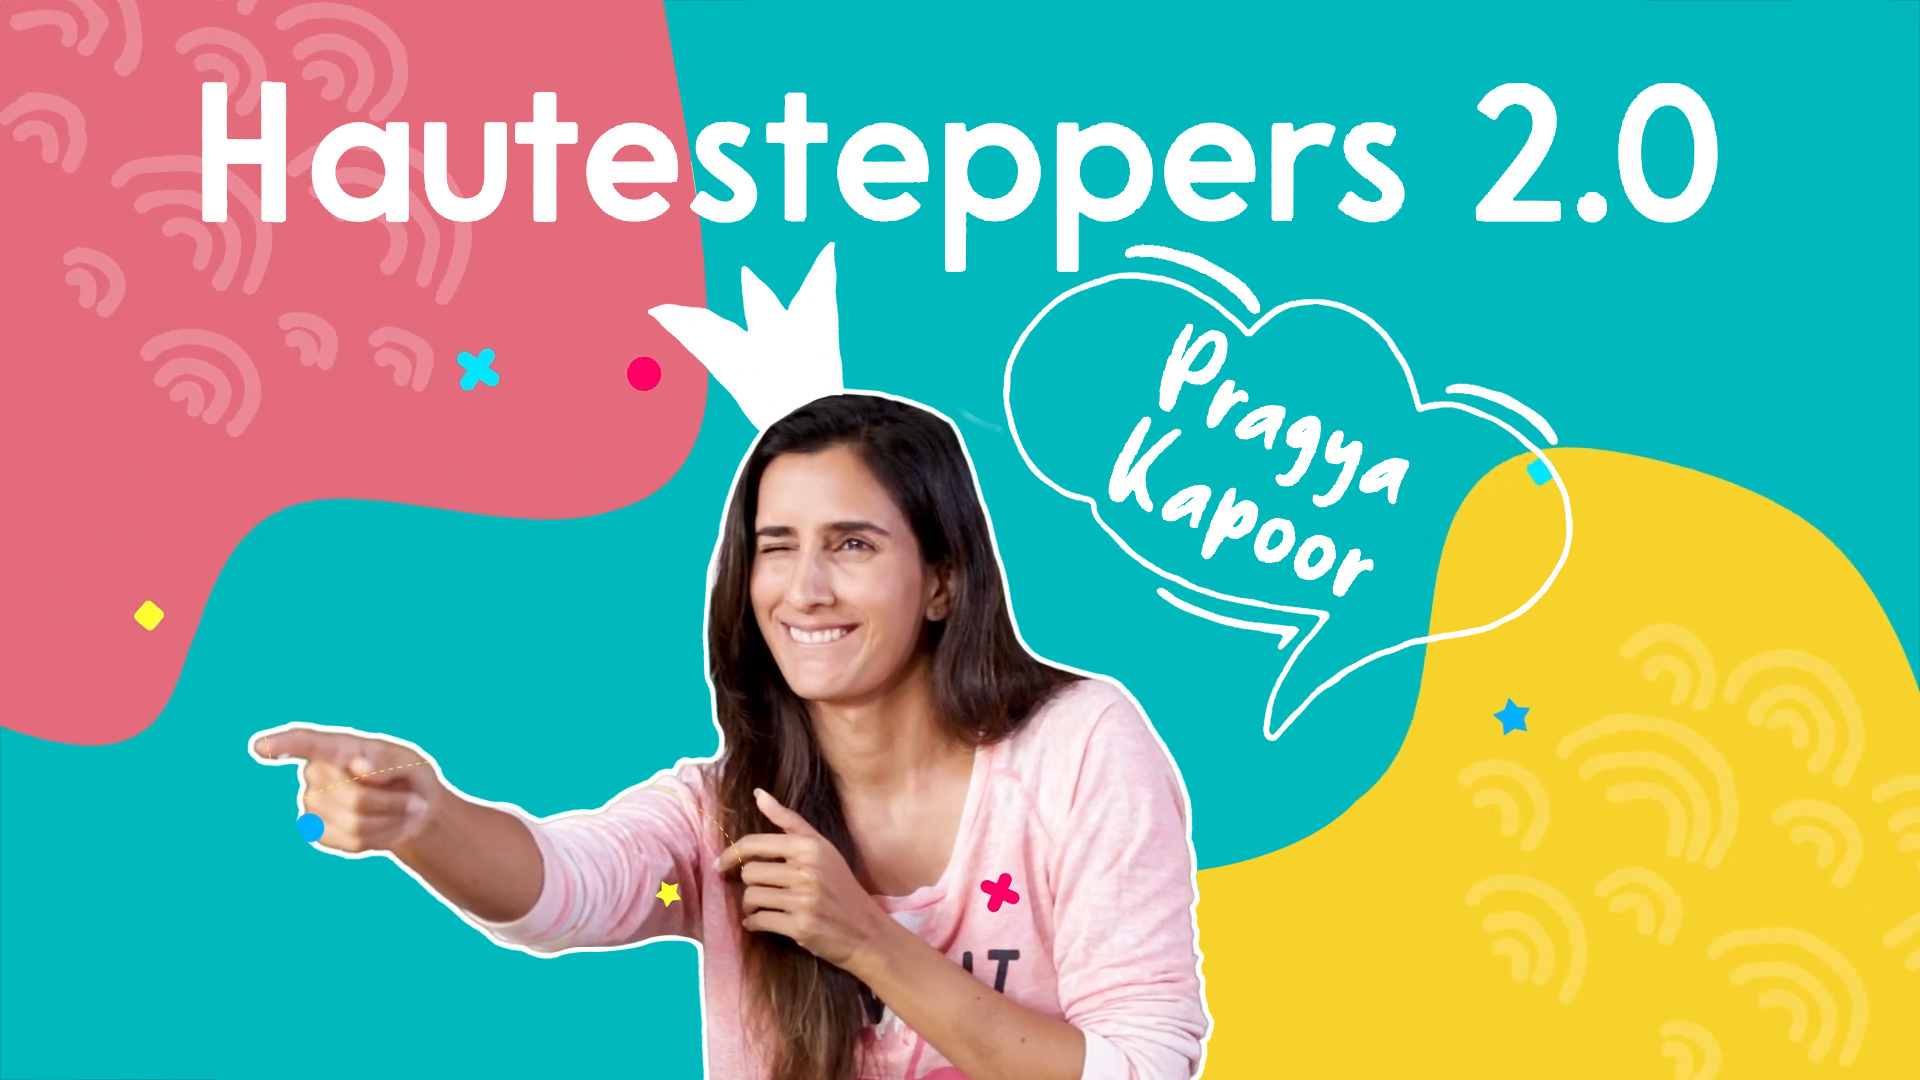 Hautesteppers 2.0: Pragya Kapoor Says She Joined Bollywood Because Of Jackie Shroff, Stayed For Her Passion For Producing